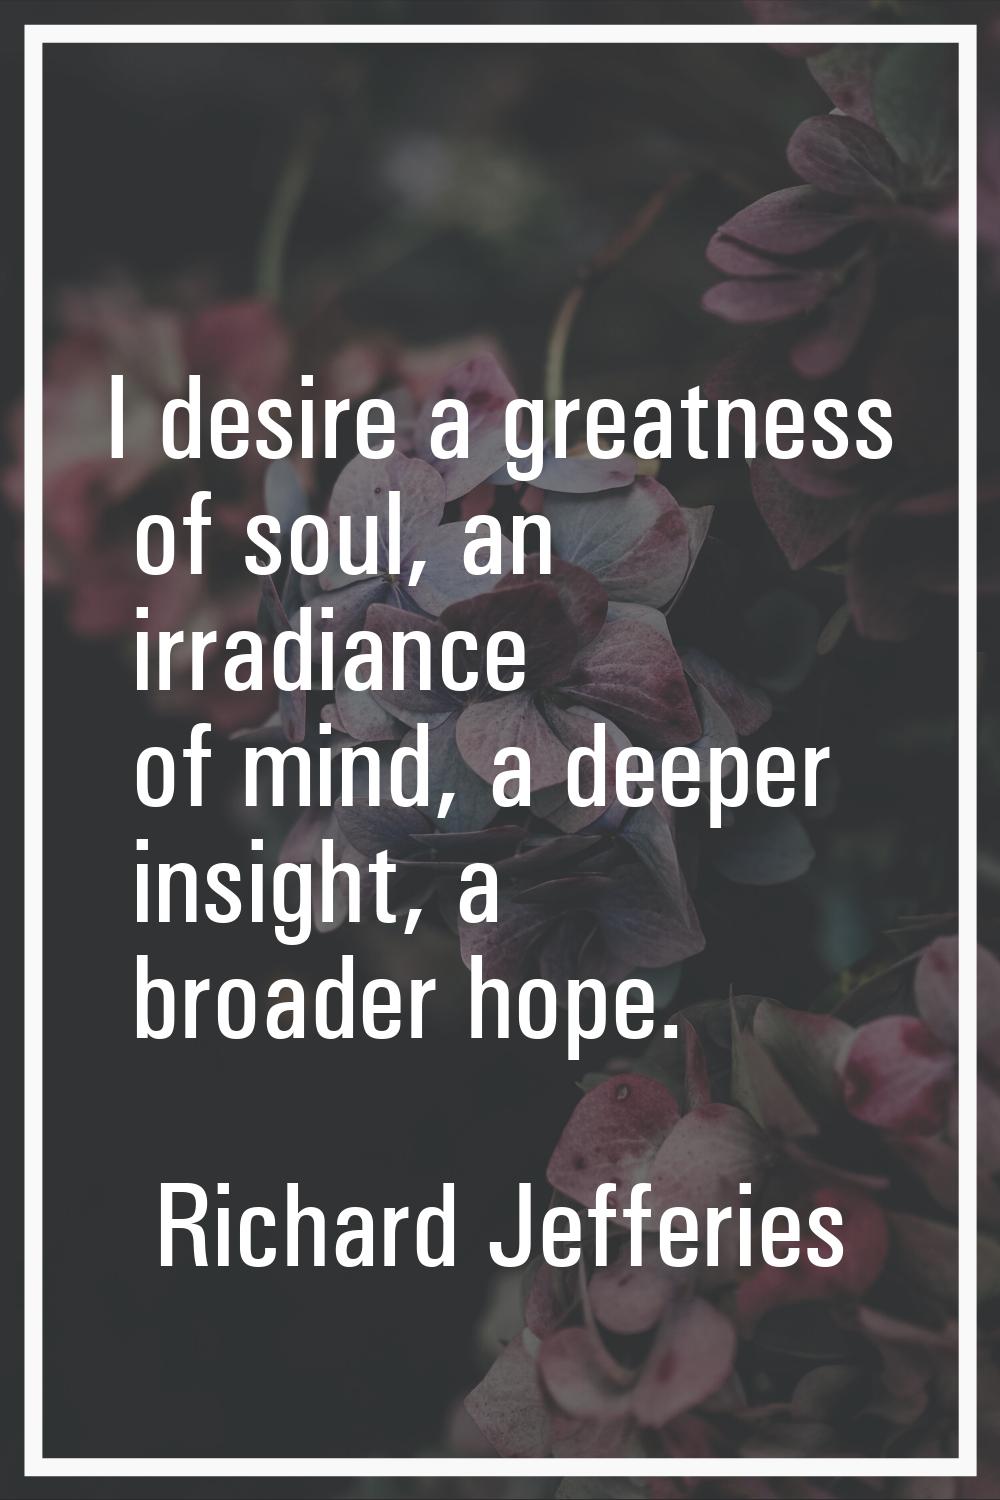 I desire a greatness of soul, an irradiance of mind, a deeper insight, a broader hope.